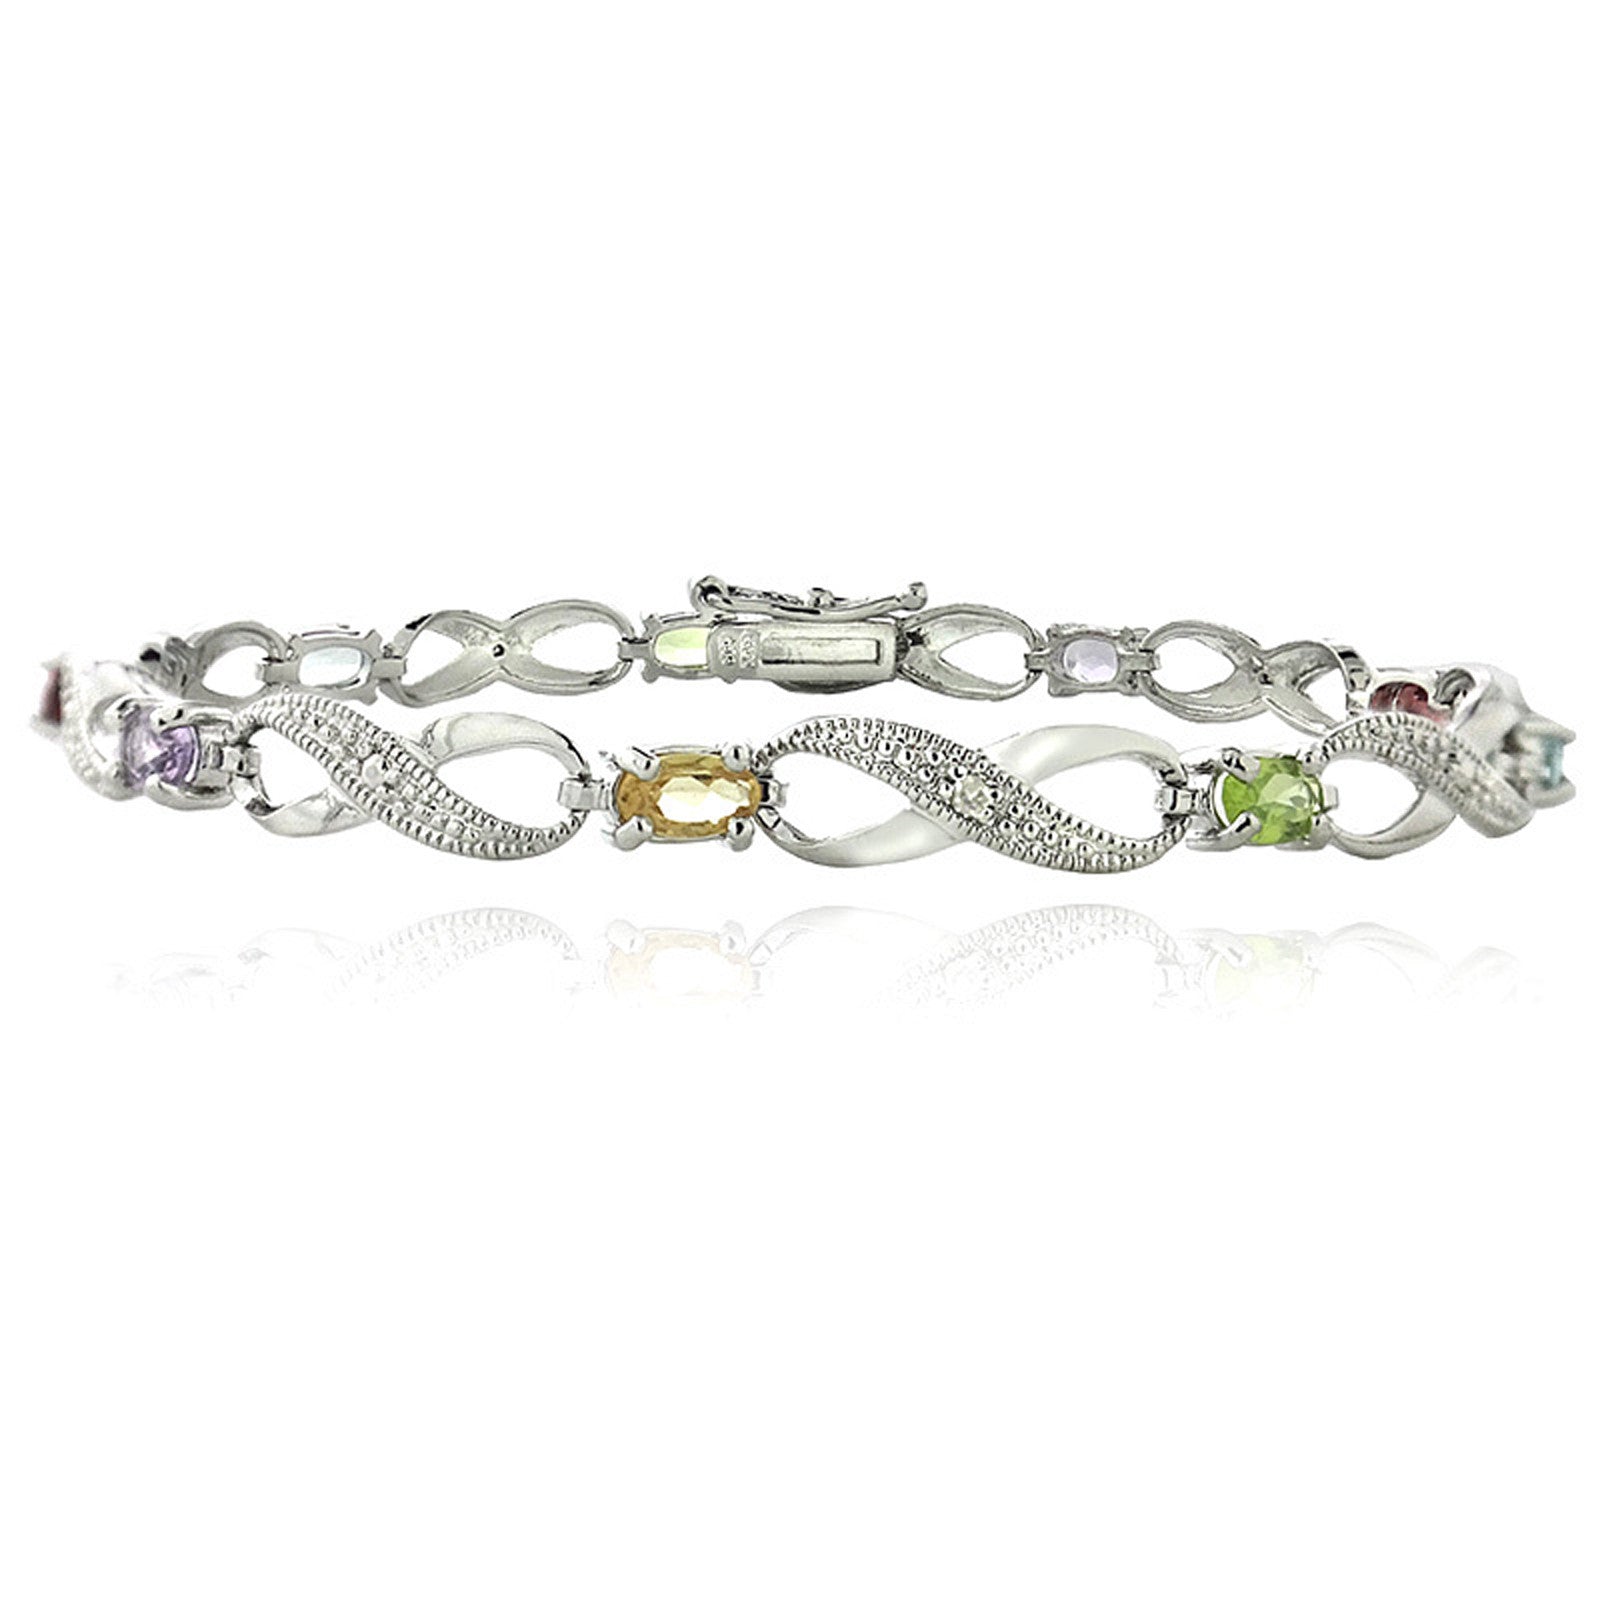 Infinity Bracelet With Diamond & Gem Accents in a Linked Style - Silver / Multi